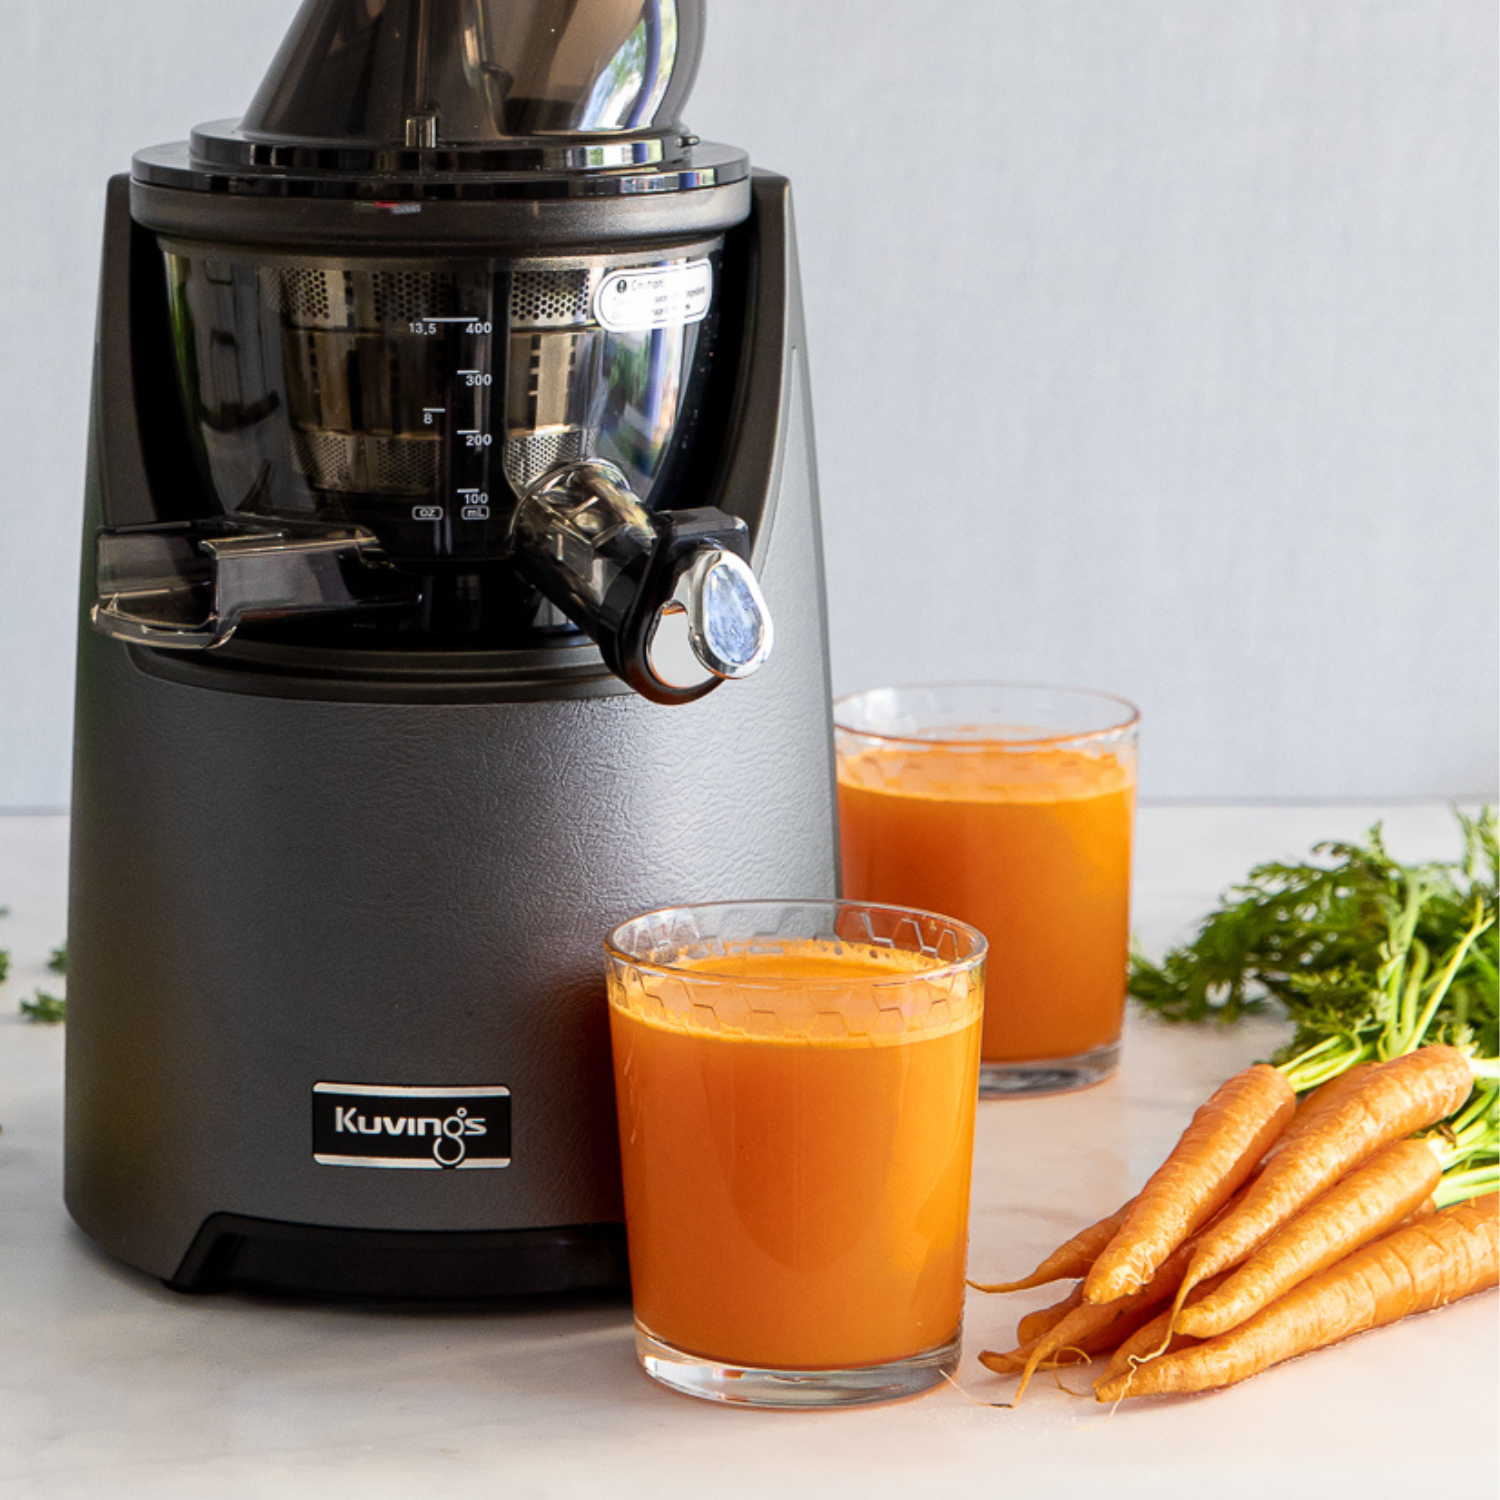 Kuvings EVO820 juicer next to 2 glasses of orange-colored juice and a bunch of carrots.